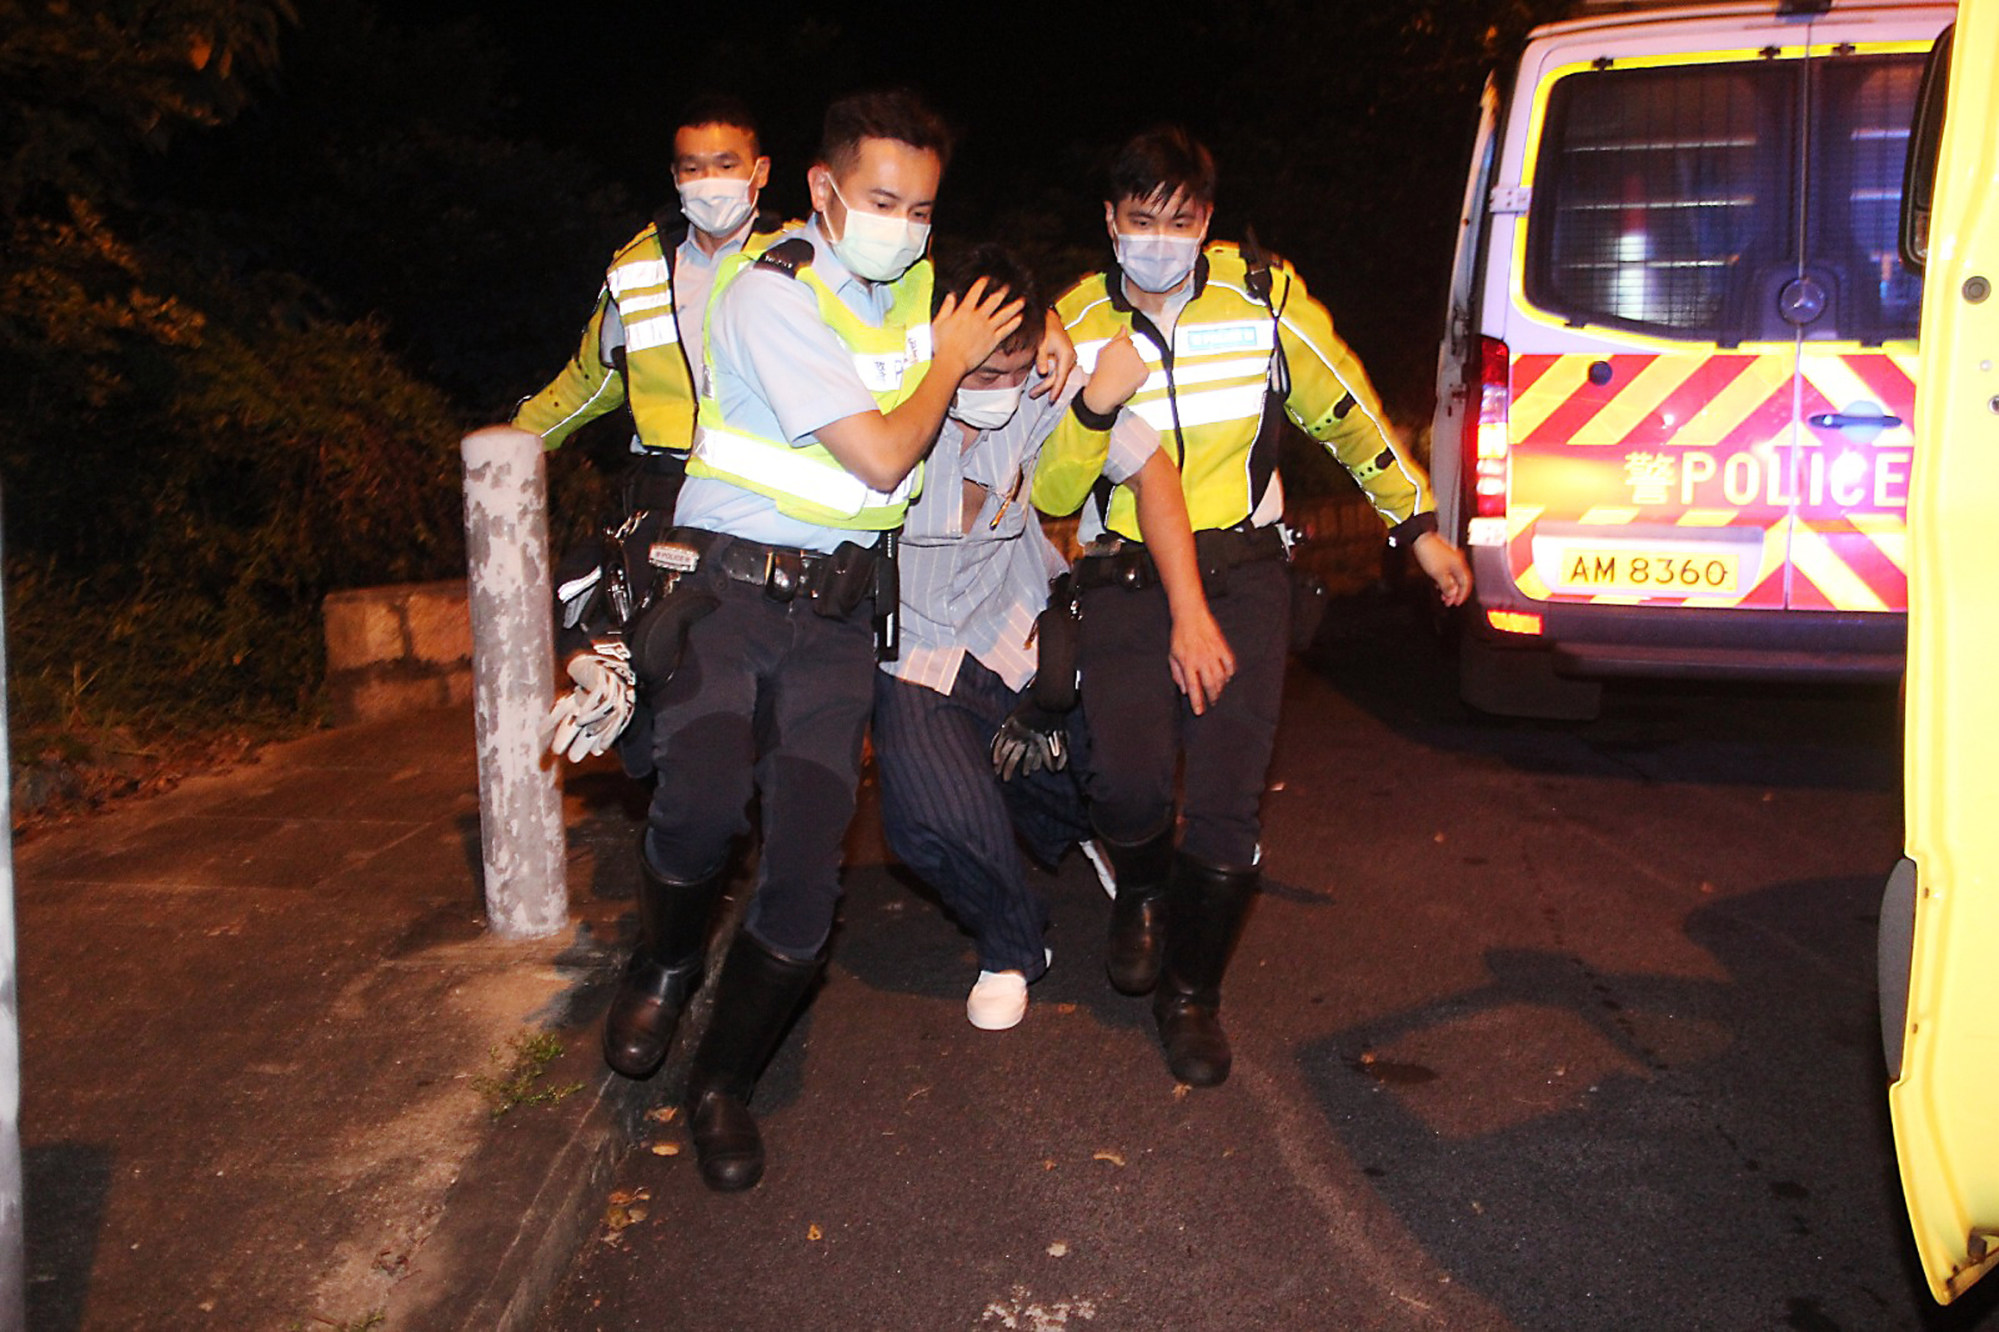 Yeung was arrested after crashing his vehicle on August 8, 2020 in Mid-Levels. Photo: Handout